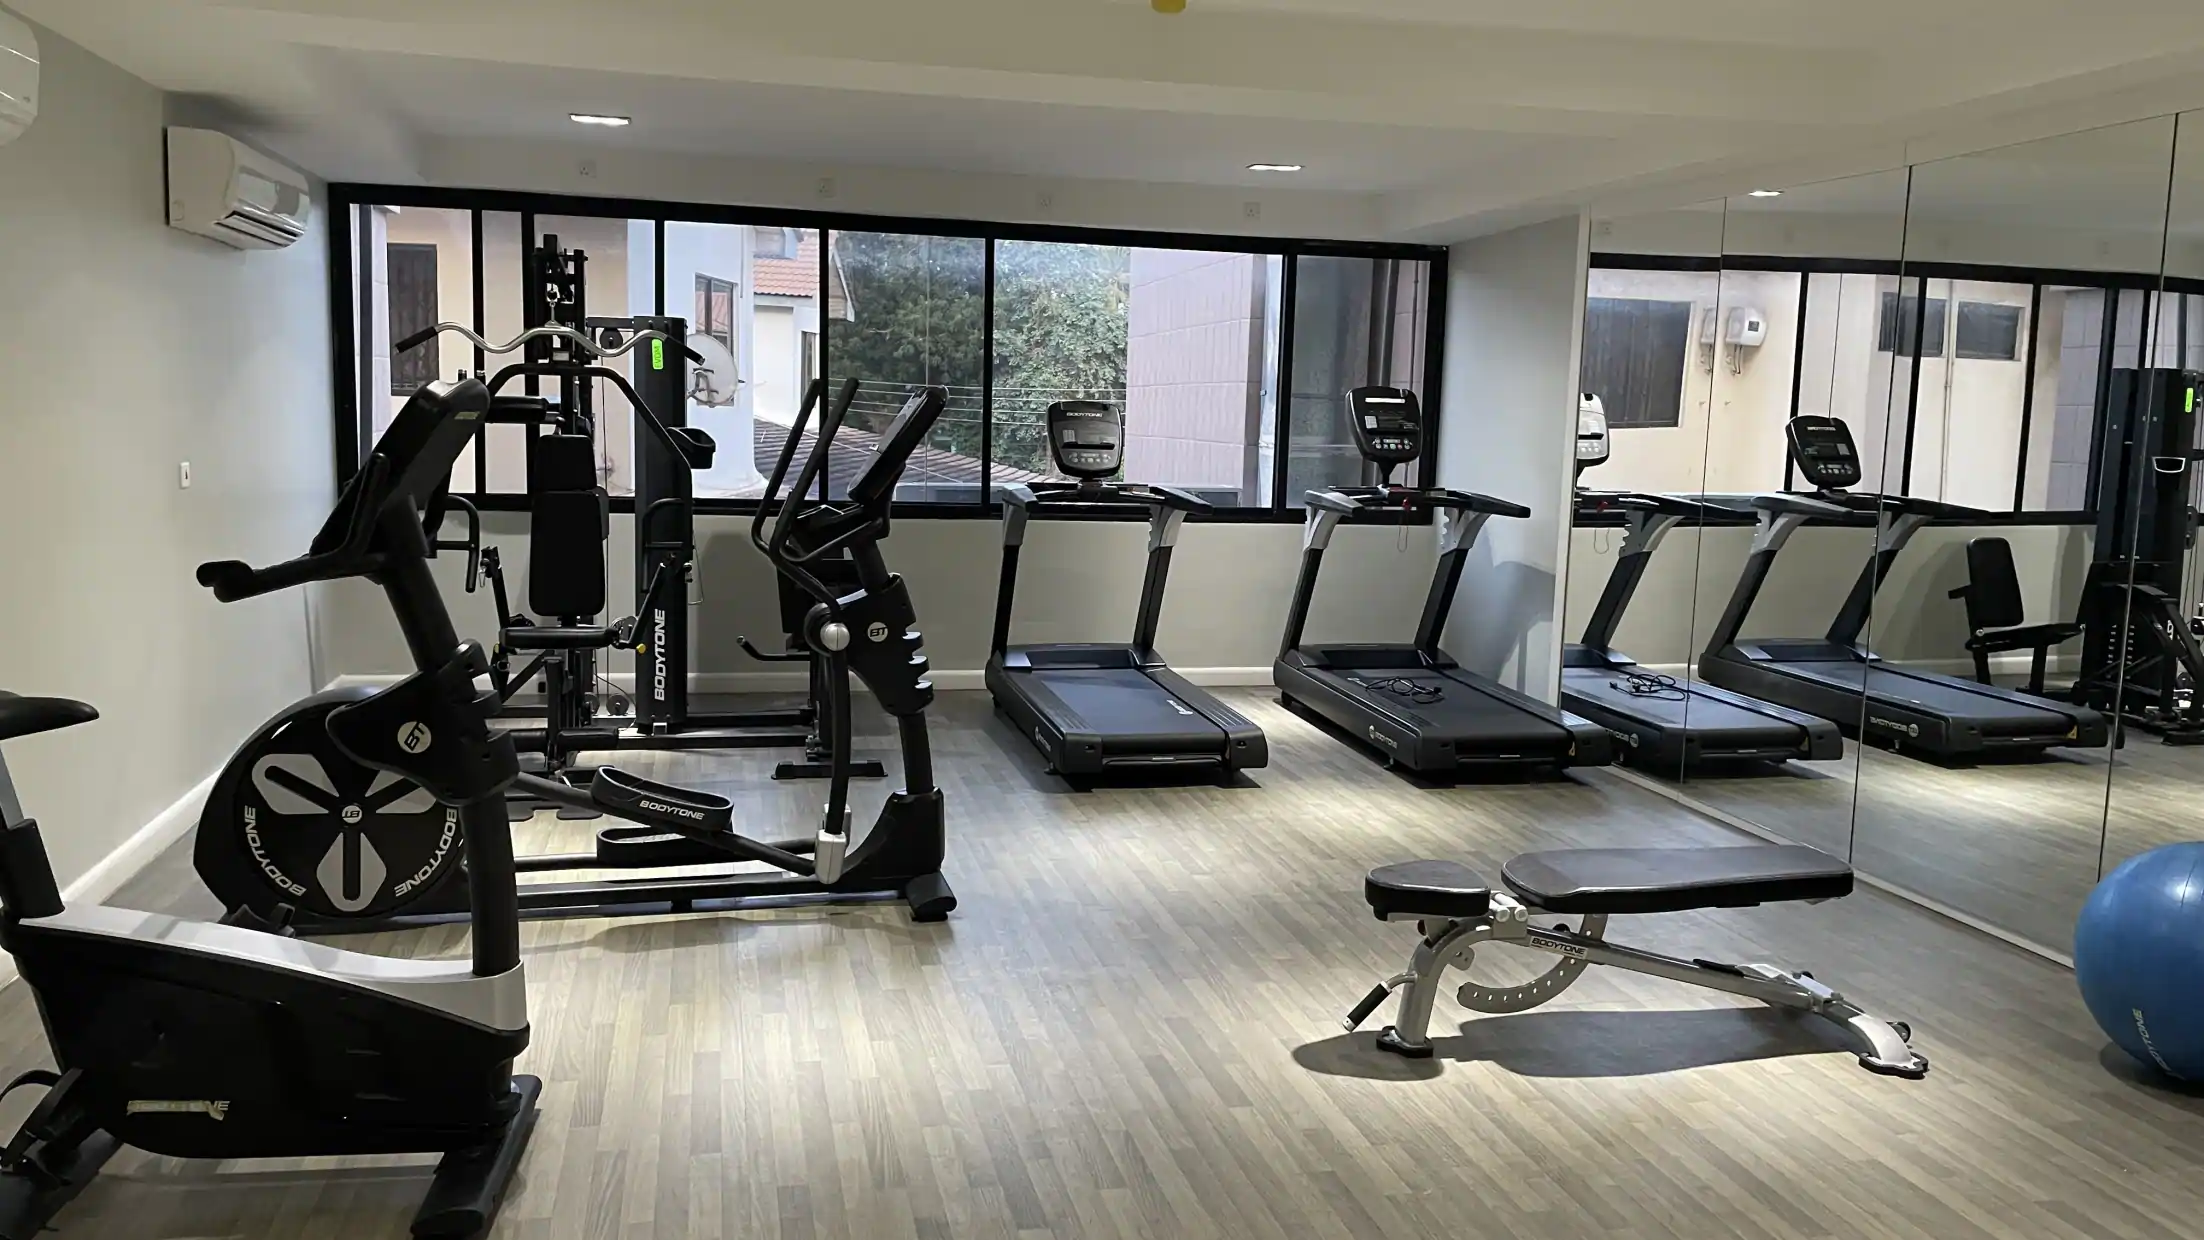 things to do at central hotel ridge gym and fitness center